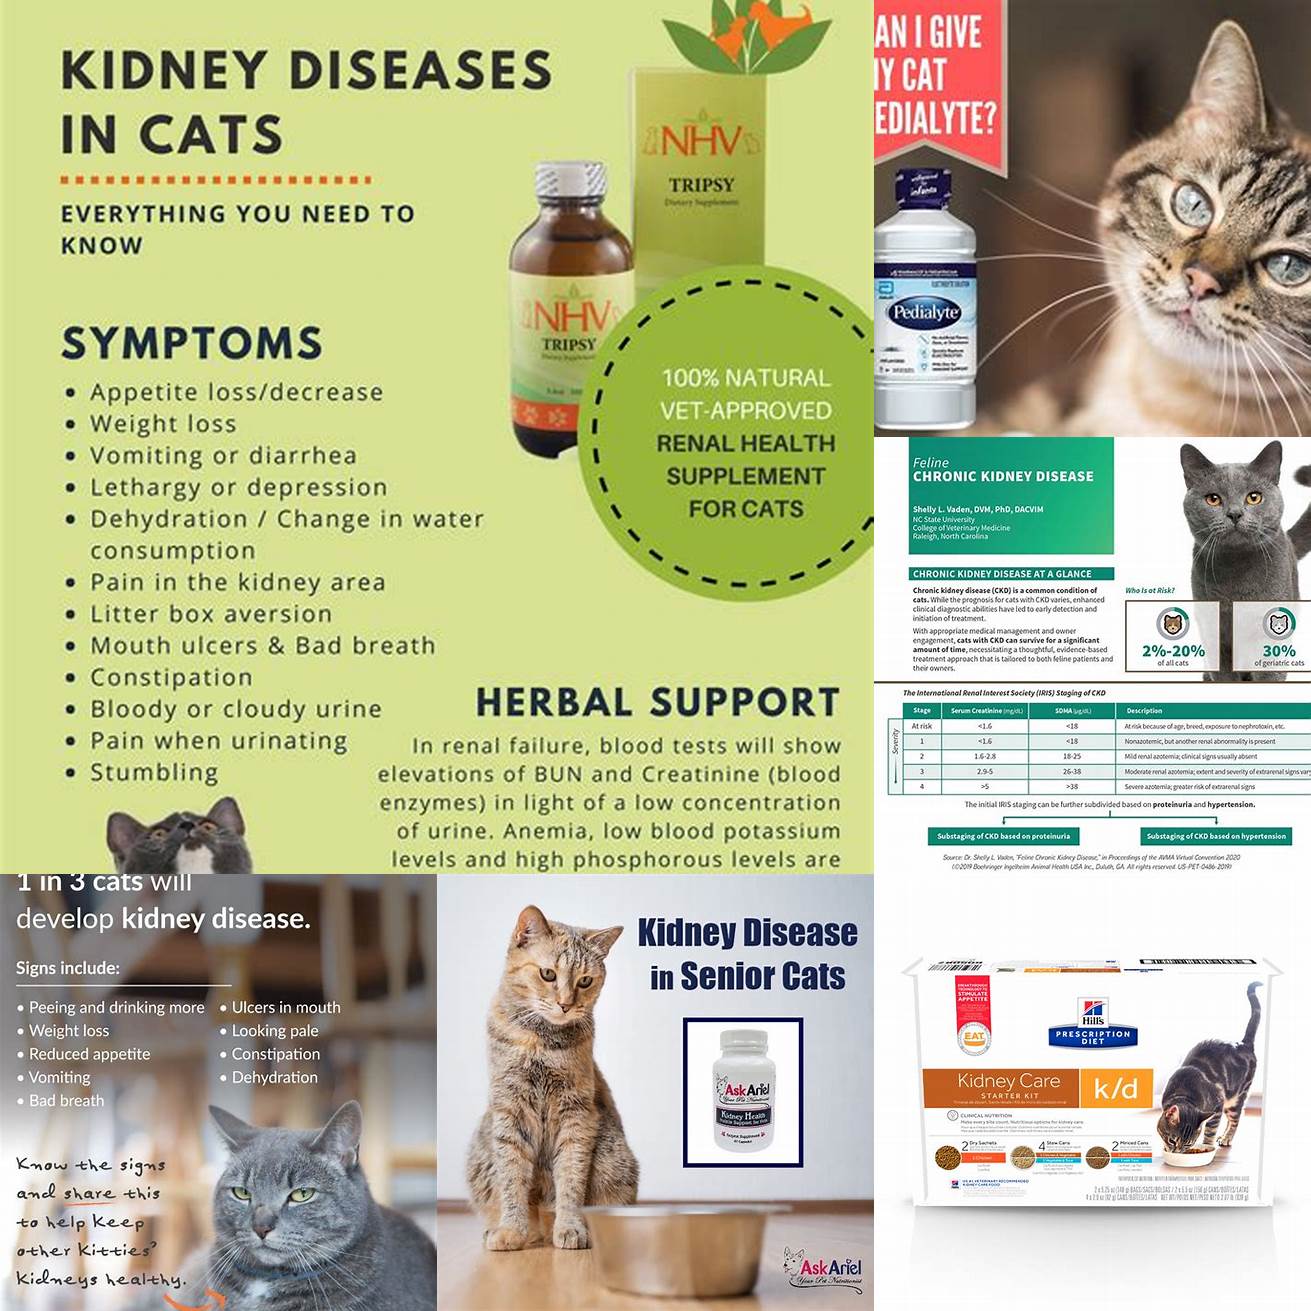 Q Is Pedialyte safe for cats with kidney disease